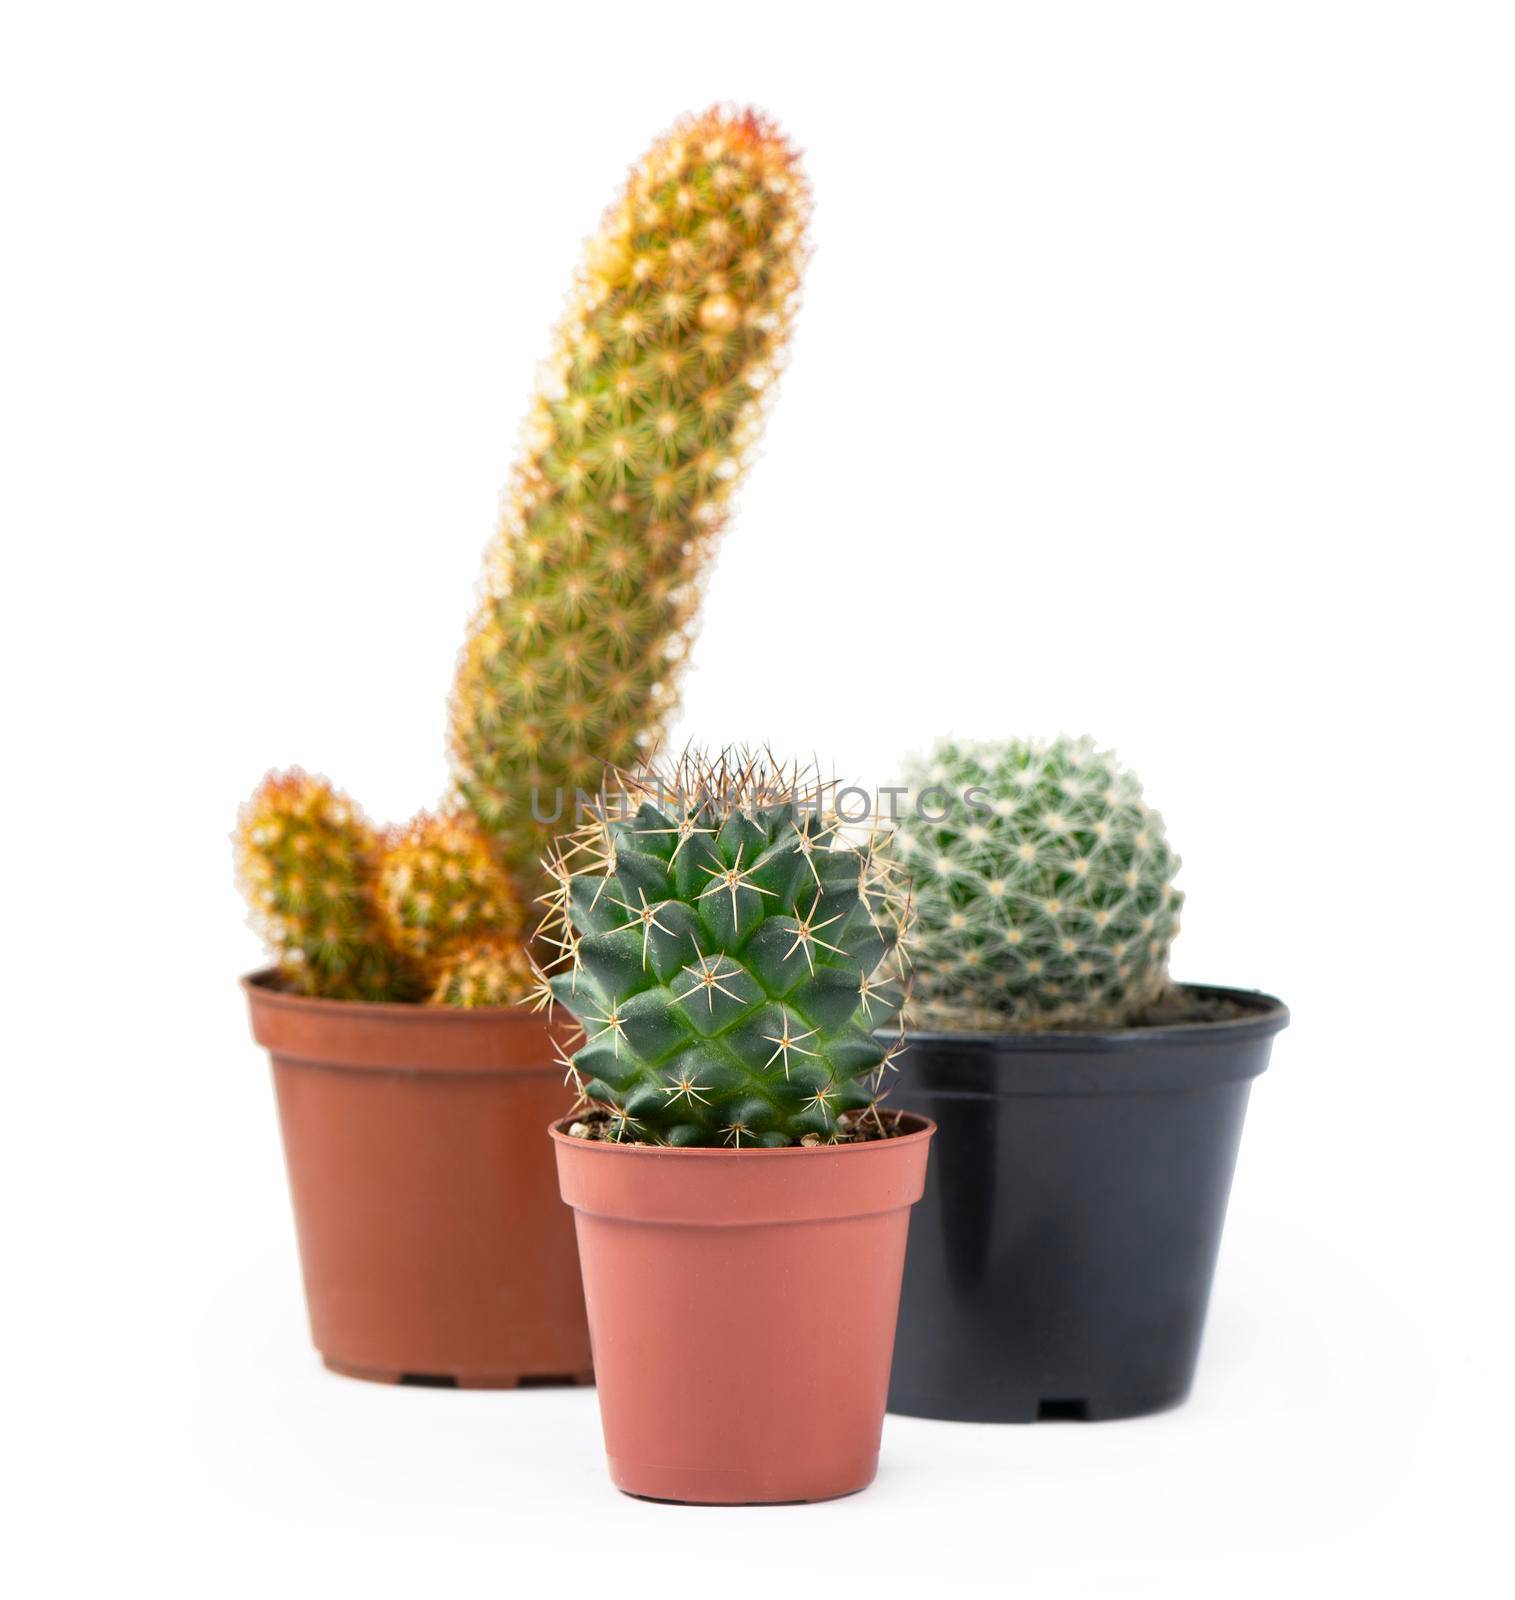 Different succulents and cactus in pots on white by aprilphoto